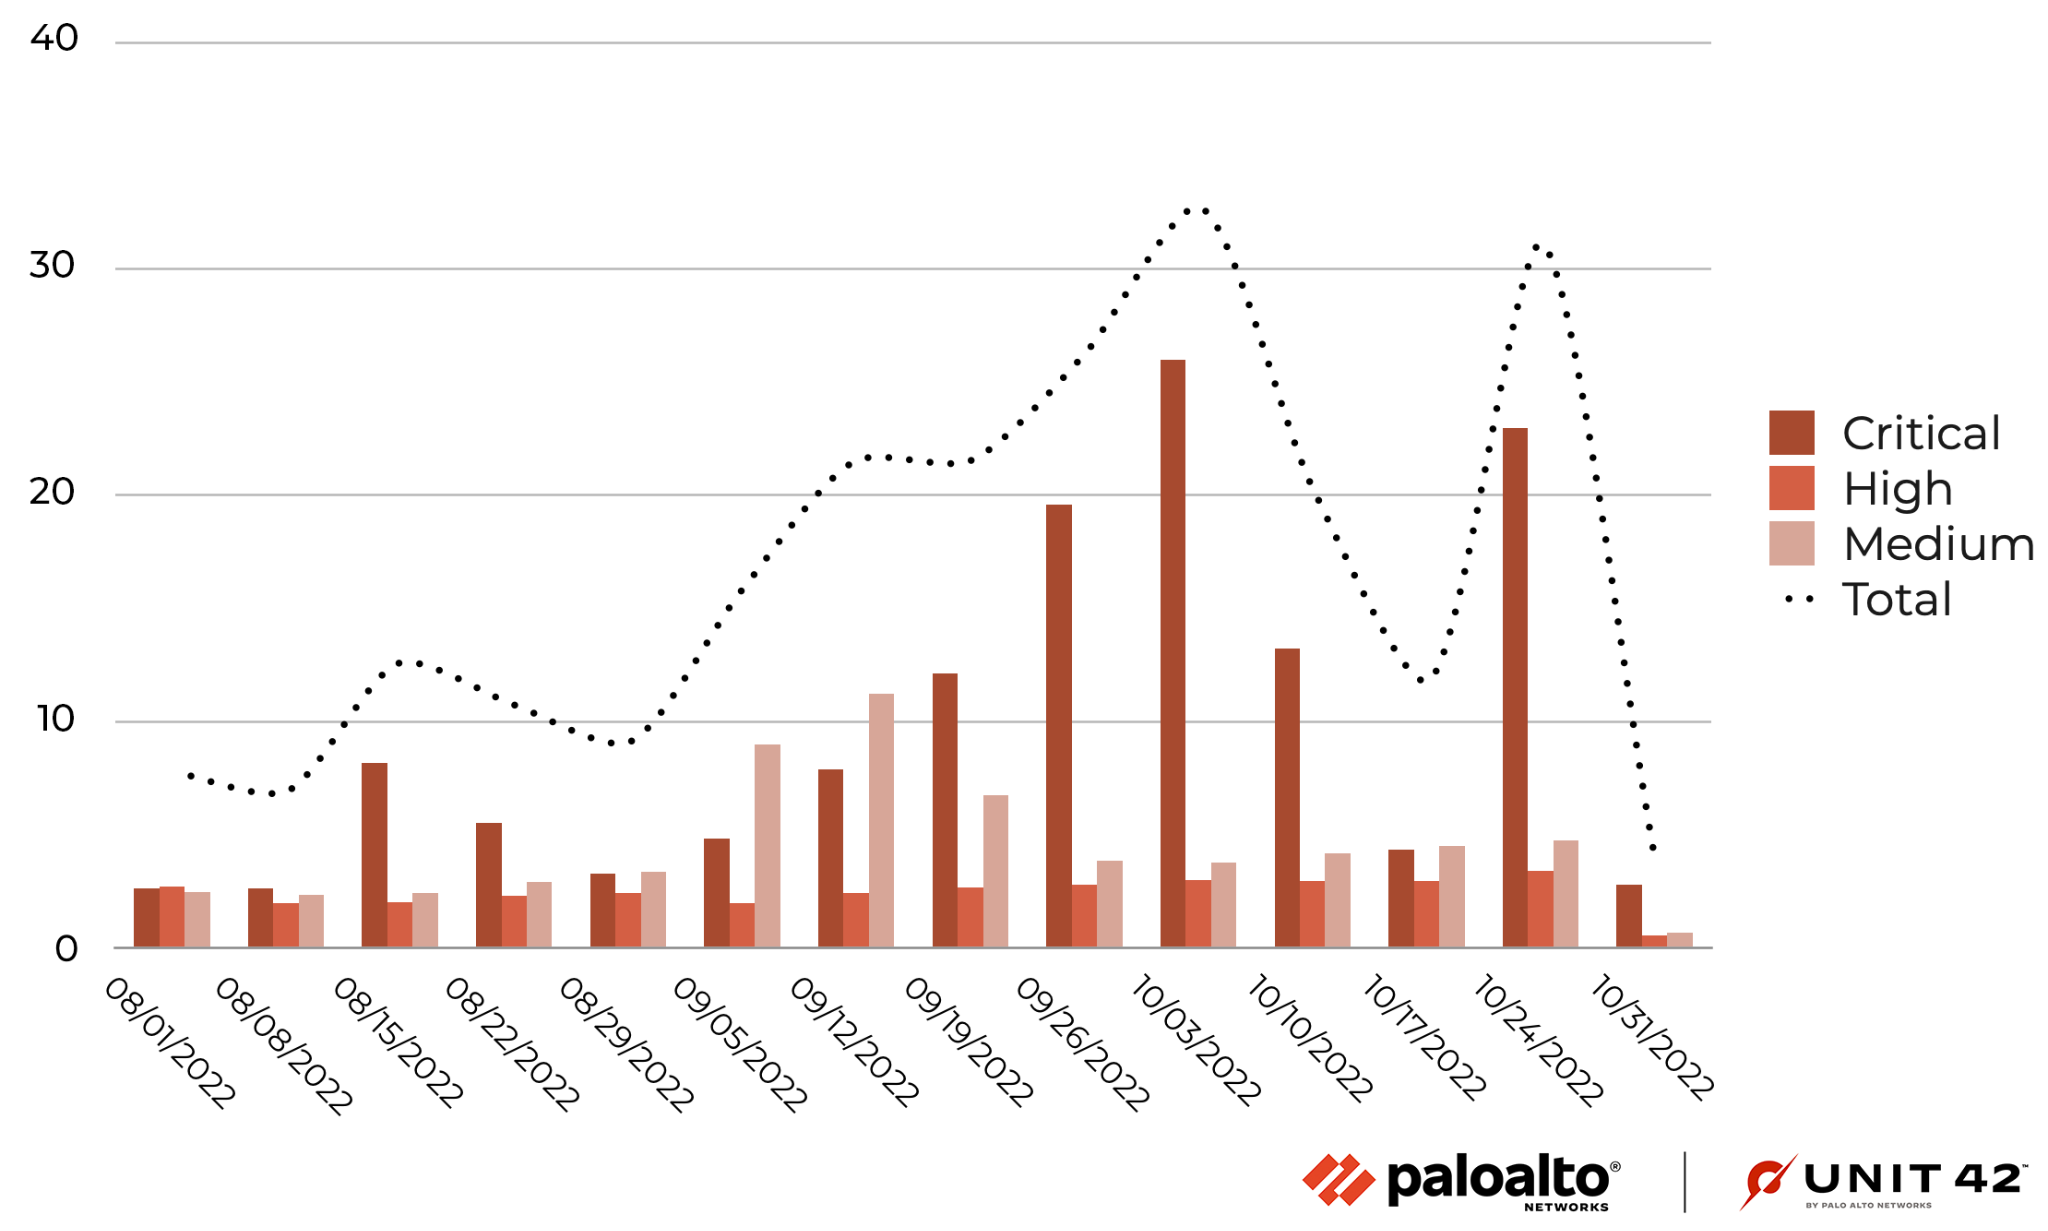 Image 7 is a bar chart detailing the severity of exploits in the wild measured weekly from August to October of 2022. There is a spike in critical attacks towards the end of the year. 